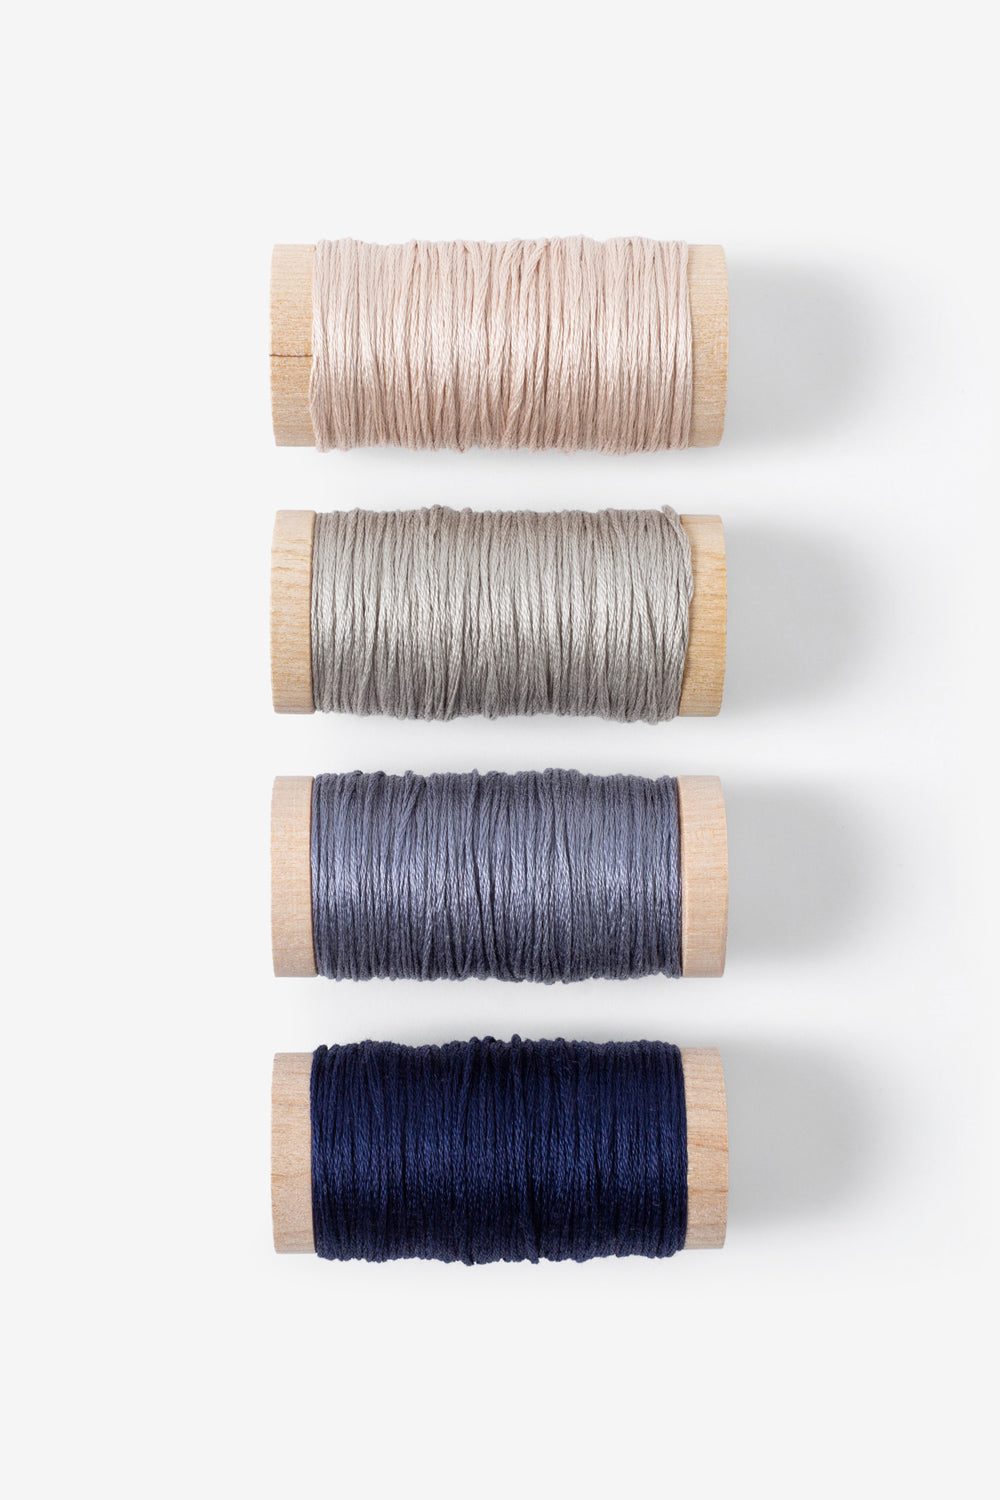 The School of Making Embroidery Floss Four Spools in navy, pewter, silt, and light pink.